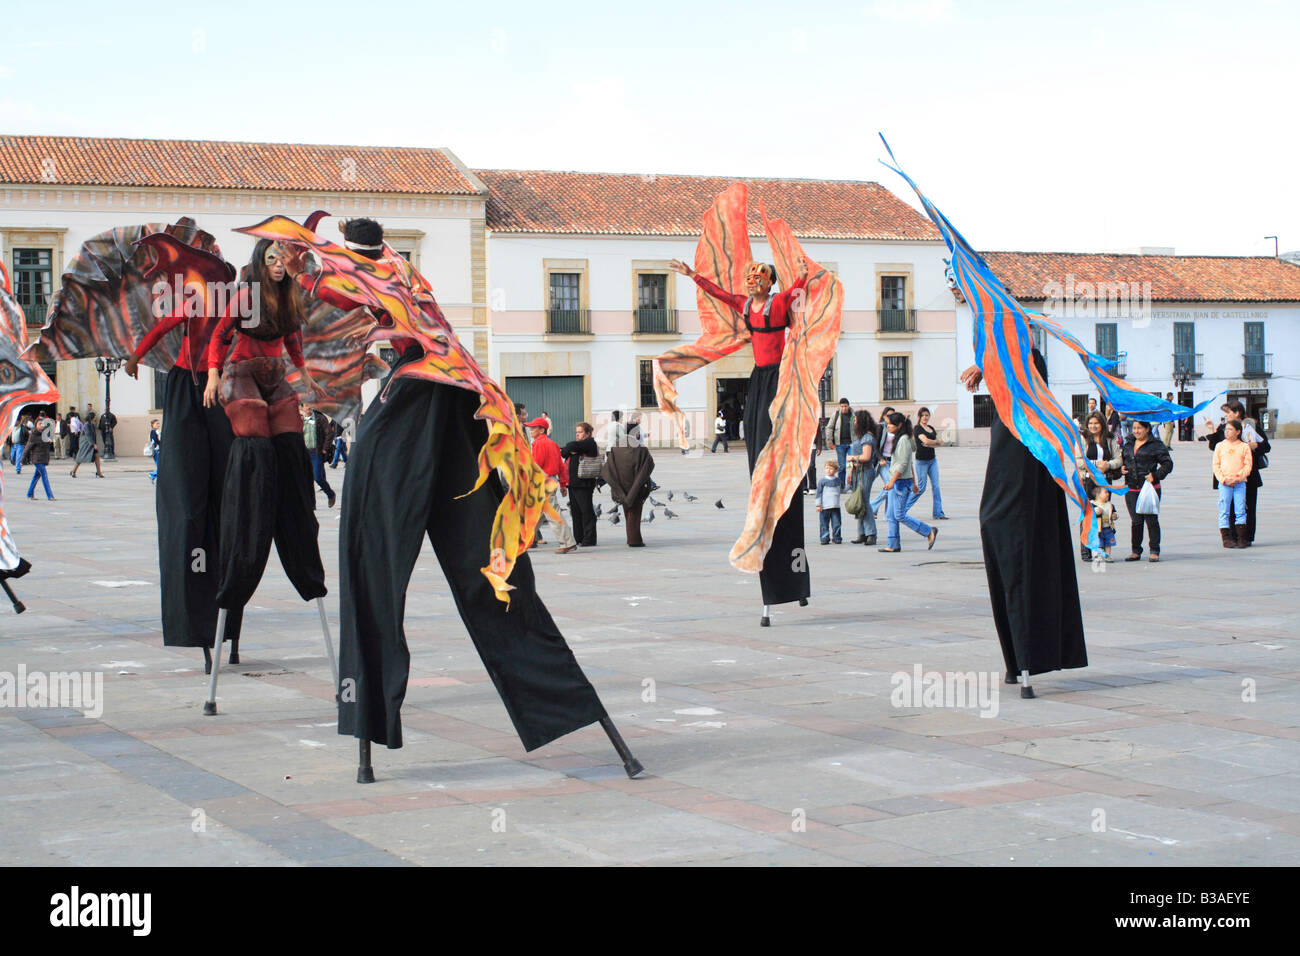 Theatre group performing outdoor, Tunja, Boyacá, Colombia, South America Stock Photo